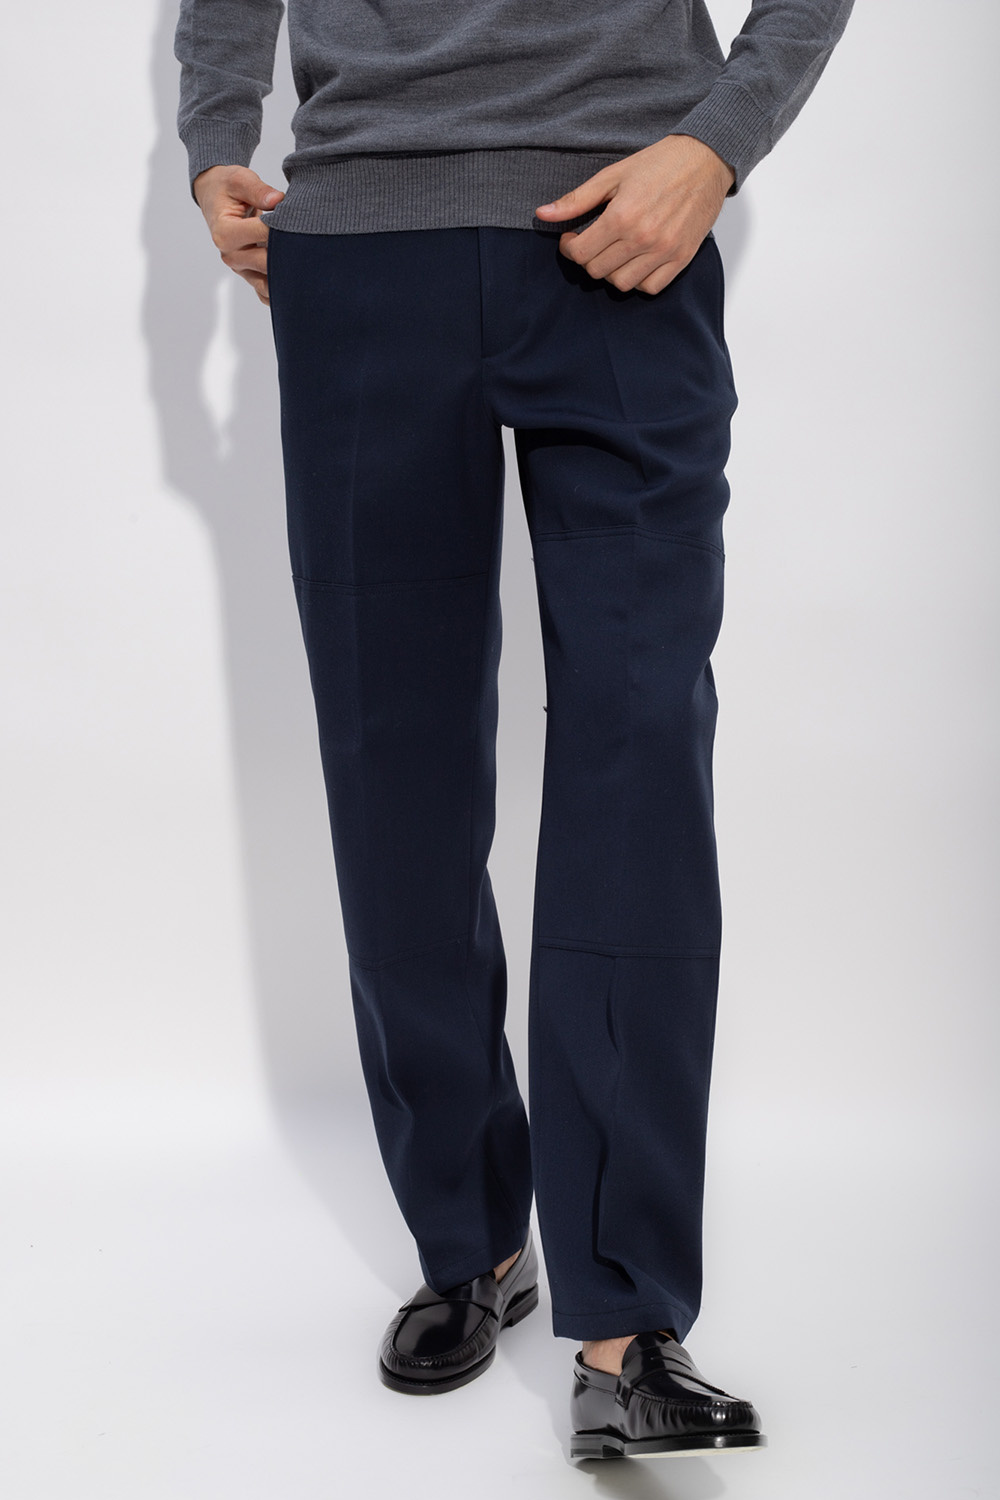 Lanvin Trousers with stitching | Men's Clothing | IetpShops